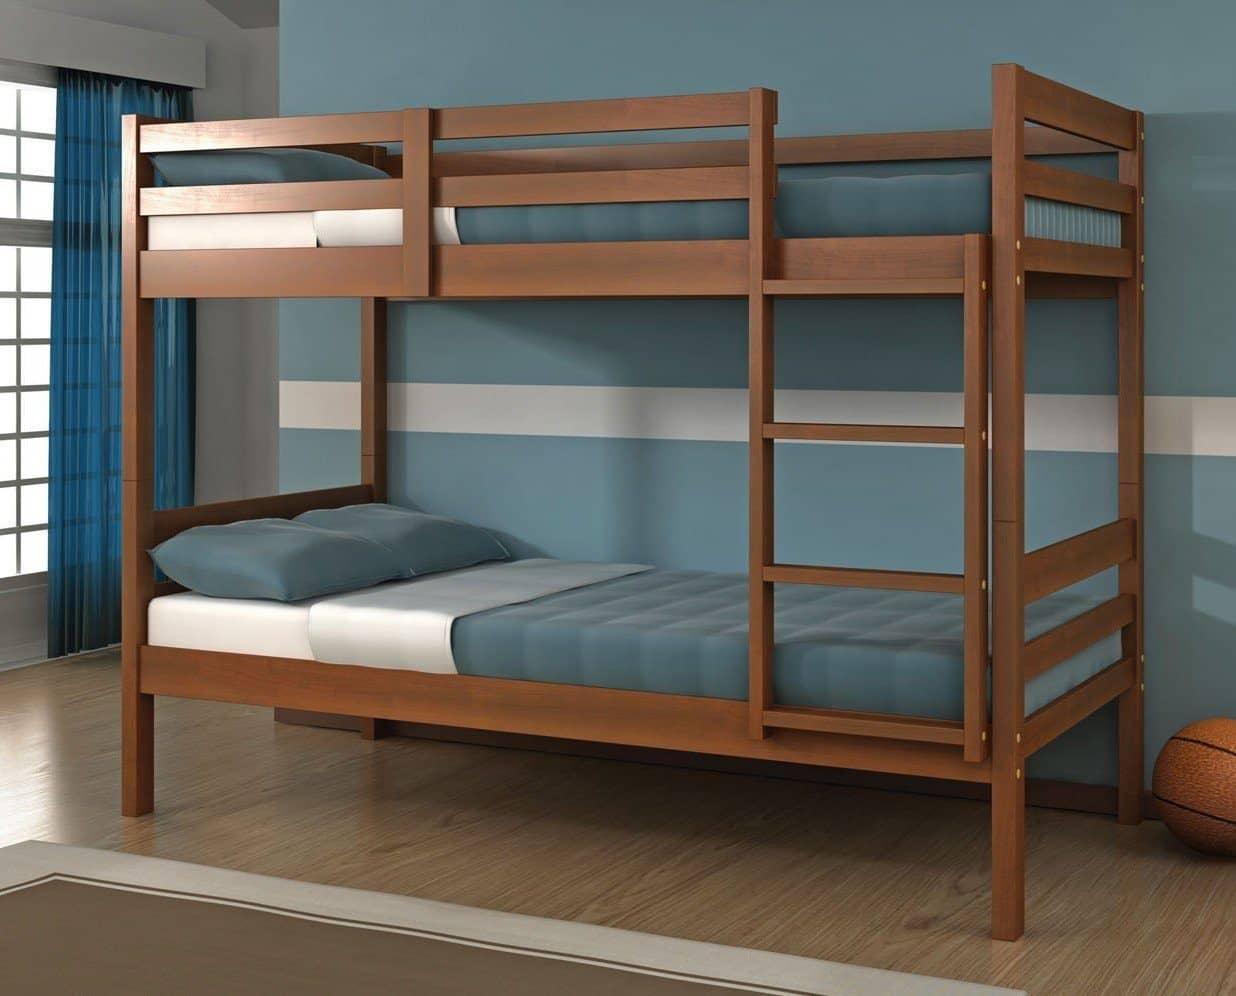 wooden bunk beds for sale